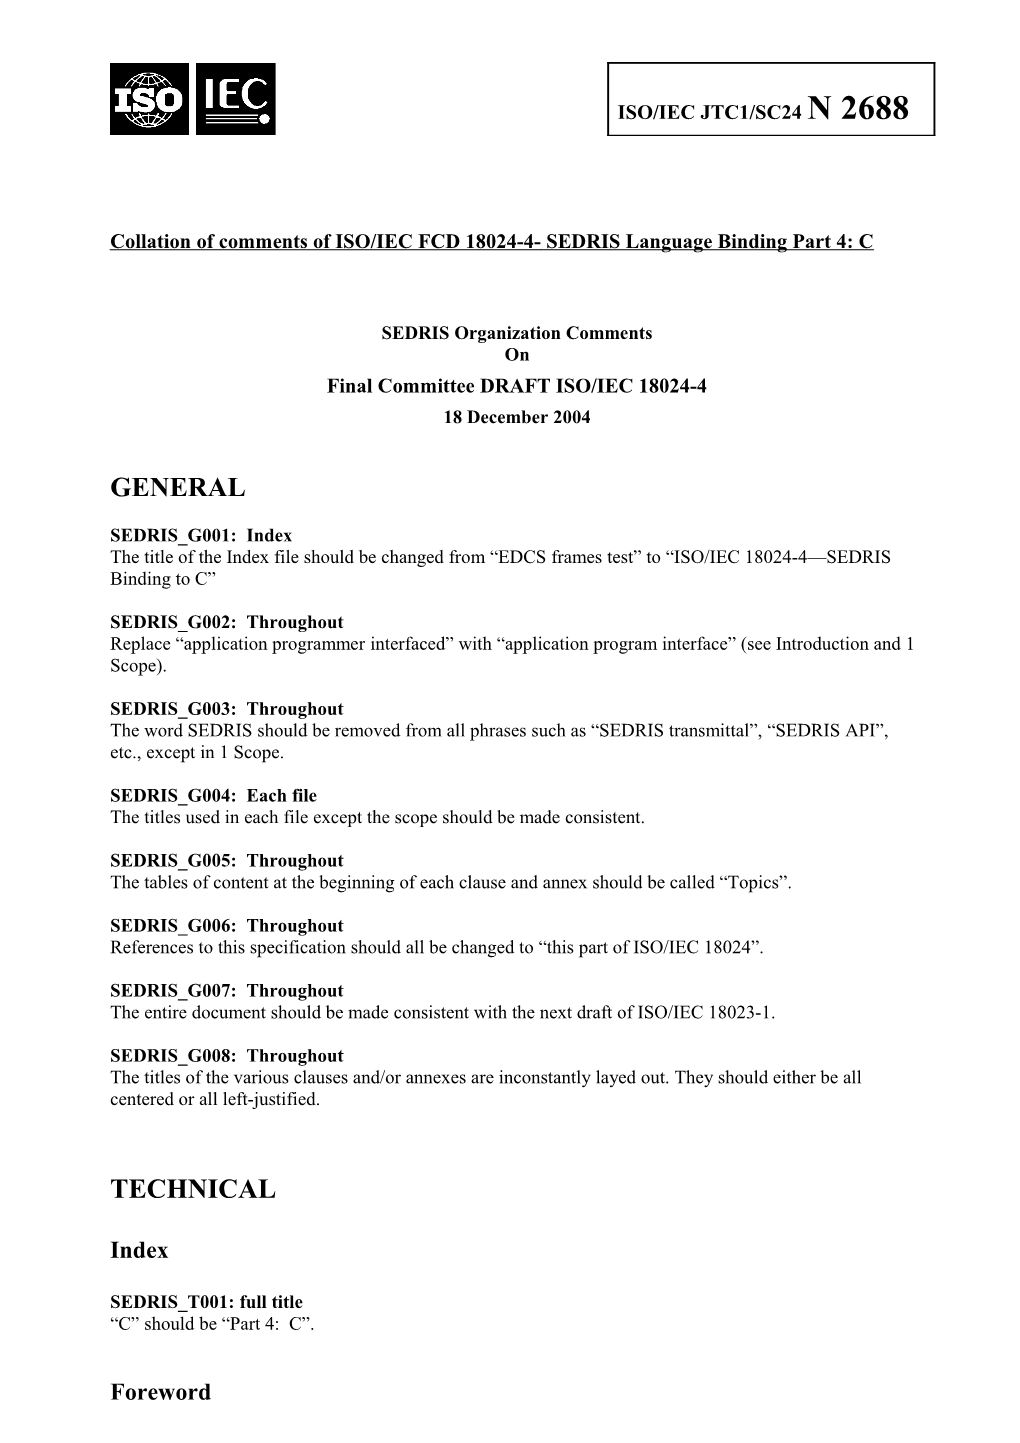 Collation of Comments of ISO/IEC FCD 18024-4- SEDRIS Language Binding Part 4: C